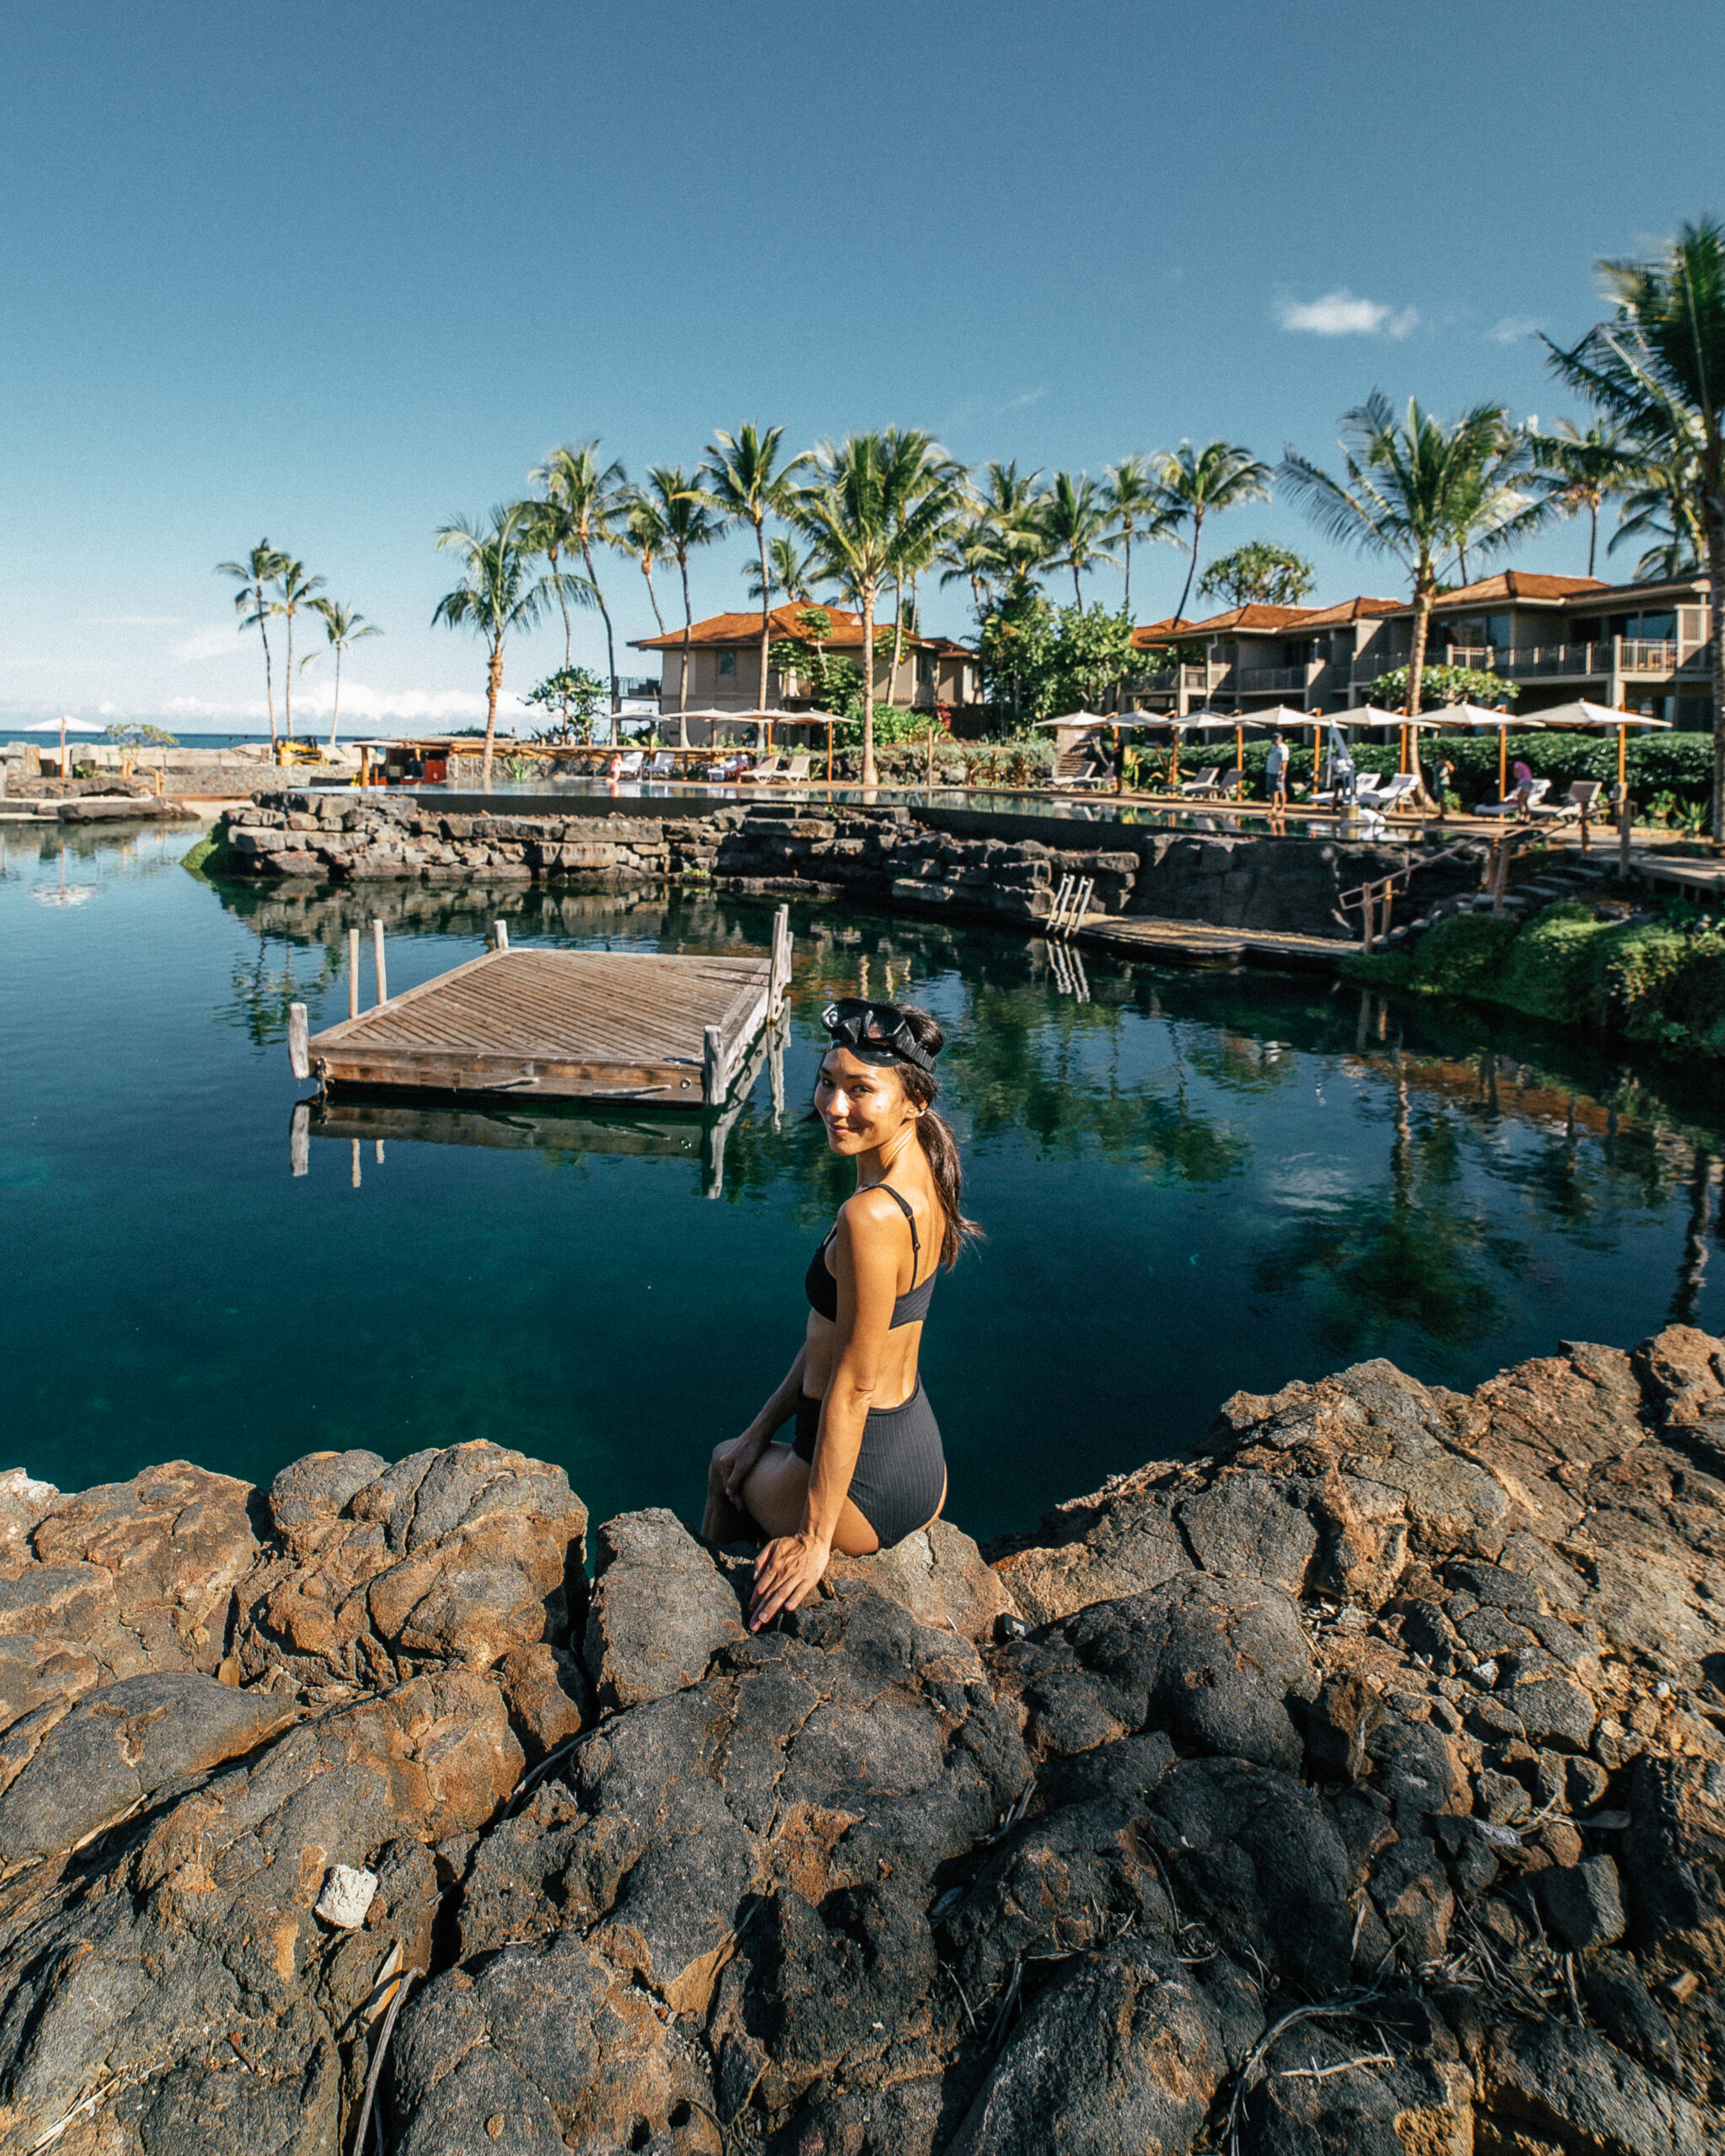 A complete guide to a week on the Big Island of Hawaii including the best beaches, waterfalls, hike, resorts, restaurants and more.